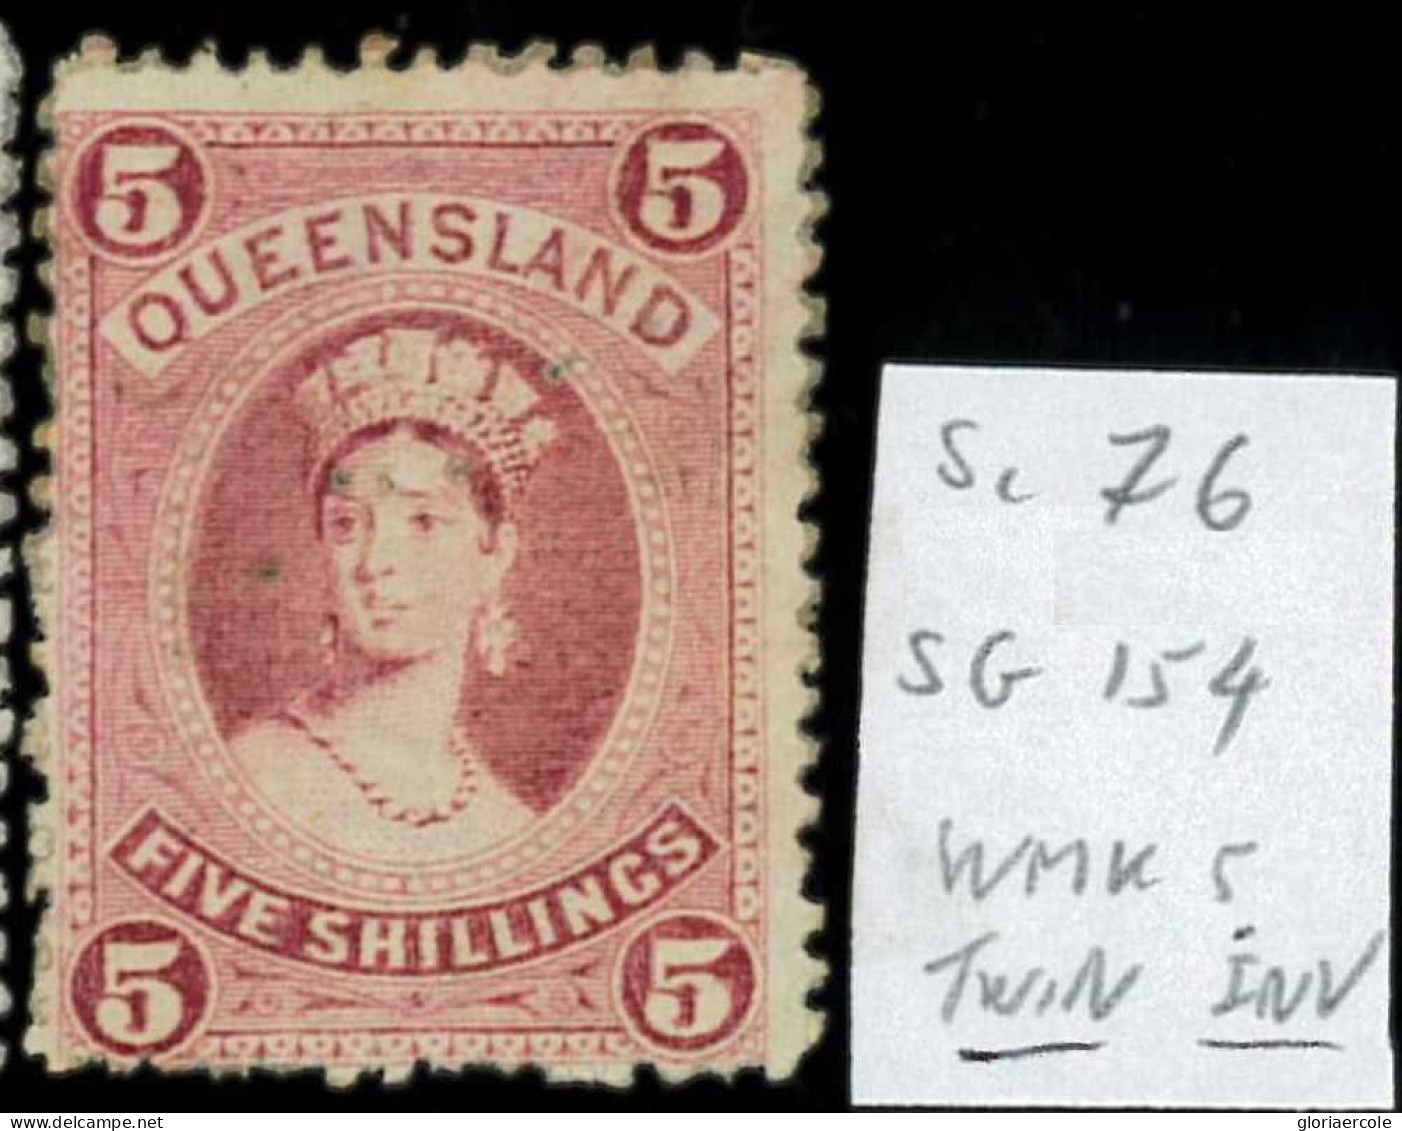 Aa5622e2  - Australia QUEENSLAND - STAMP - SG # 154 Watermark  5 Twin Inverted USED - Oblitérés